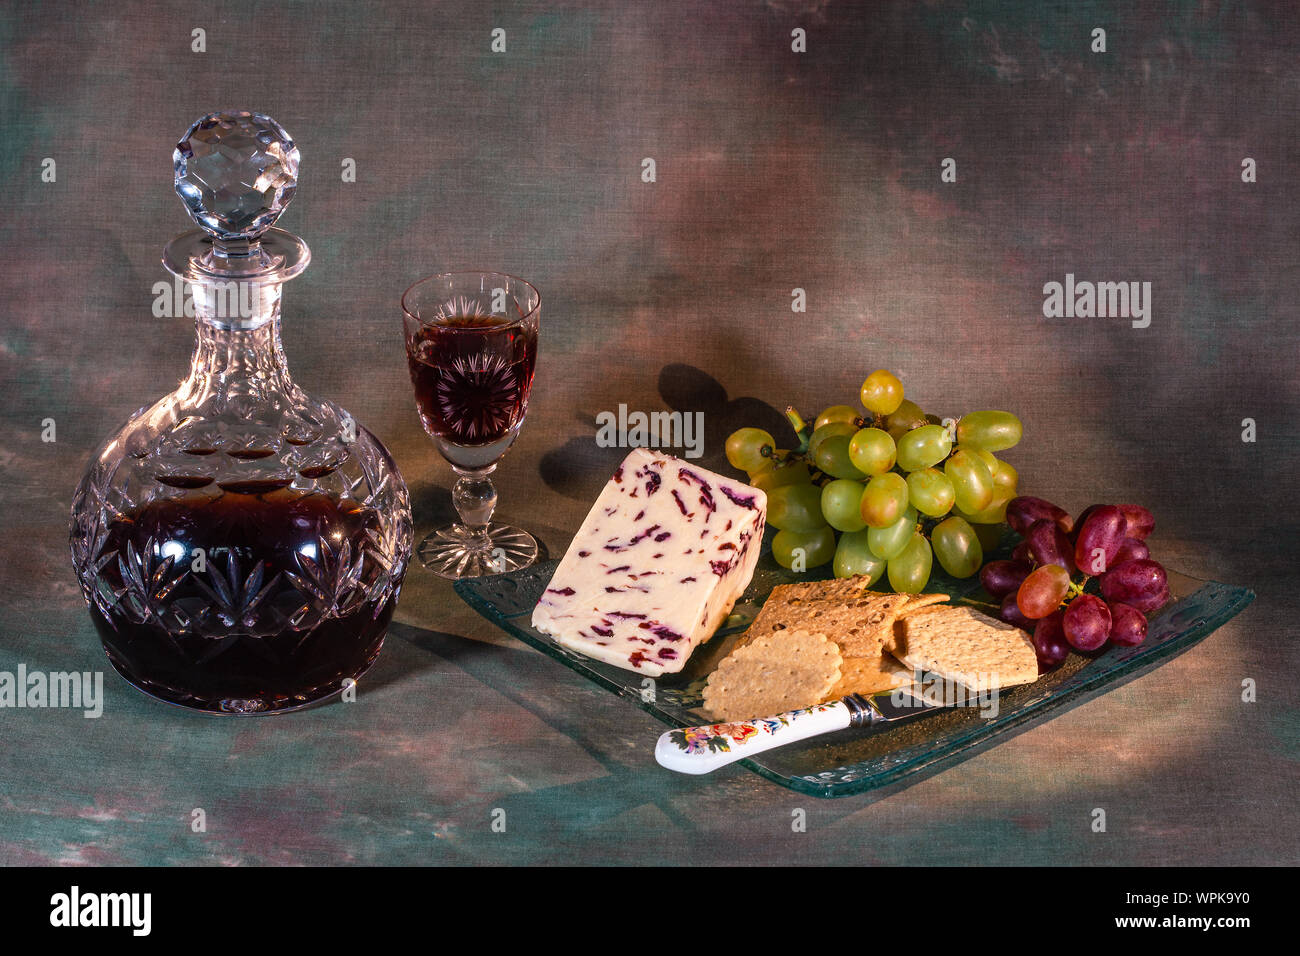 A glass of port, some cheese and biscuits Stock Photo